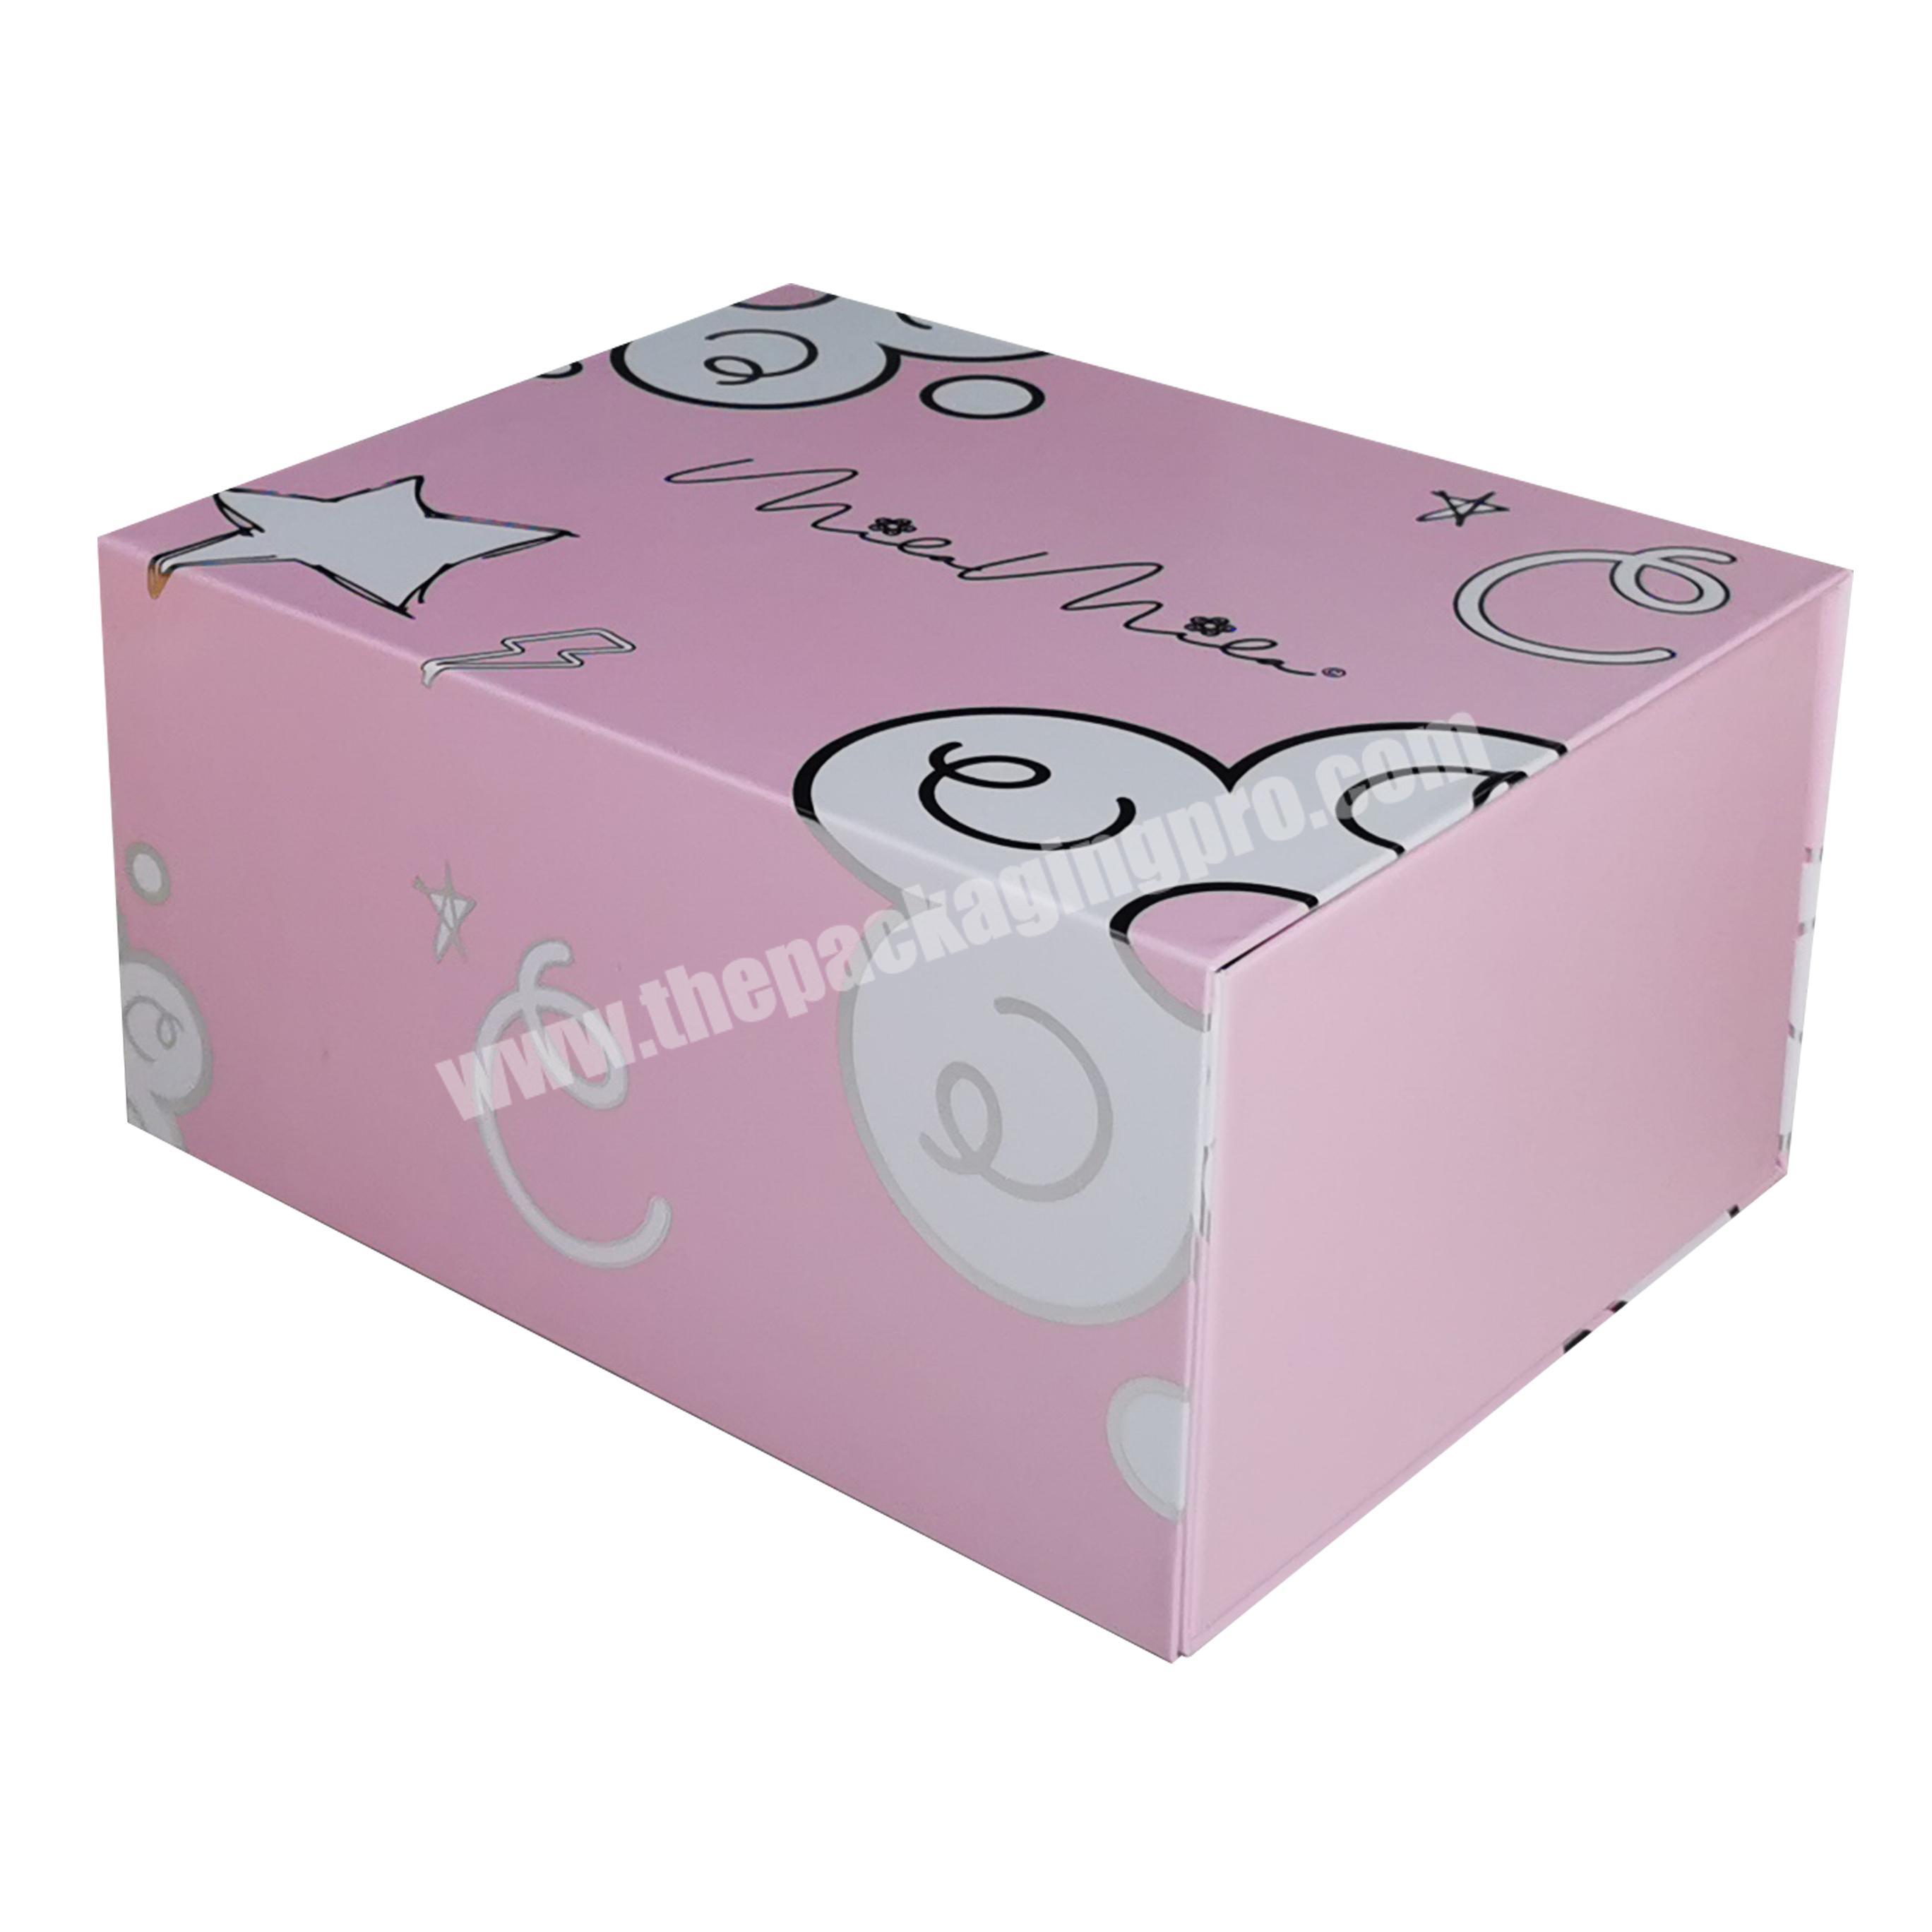 2020 New custom logo magnetic cllapsible pink gift packaging box